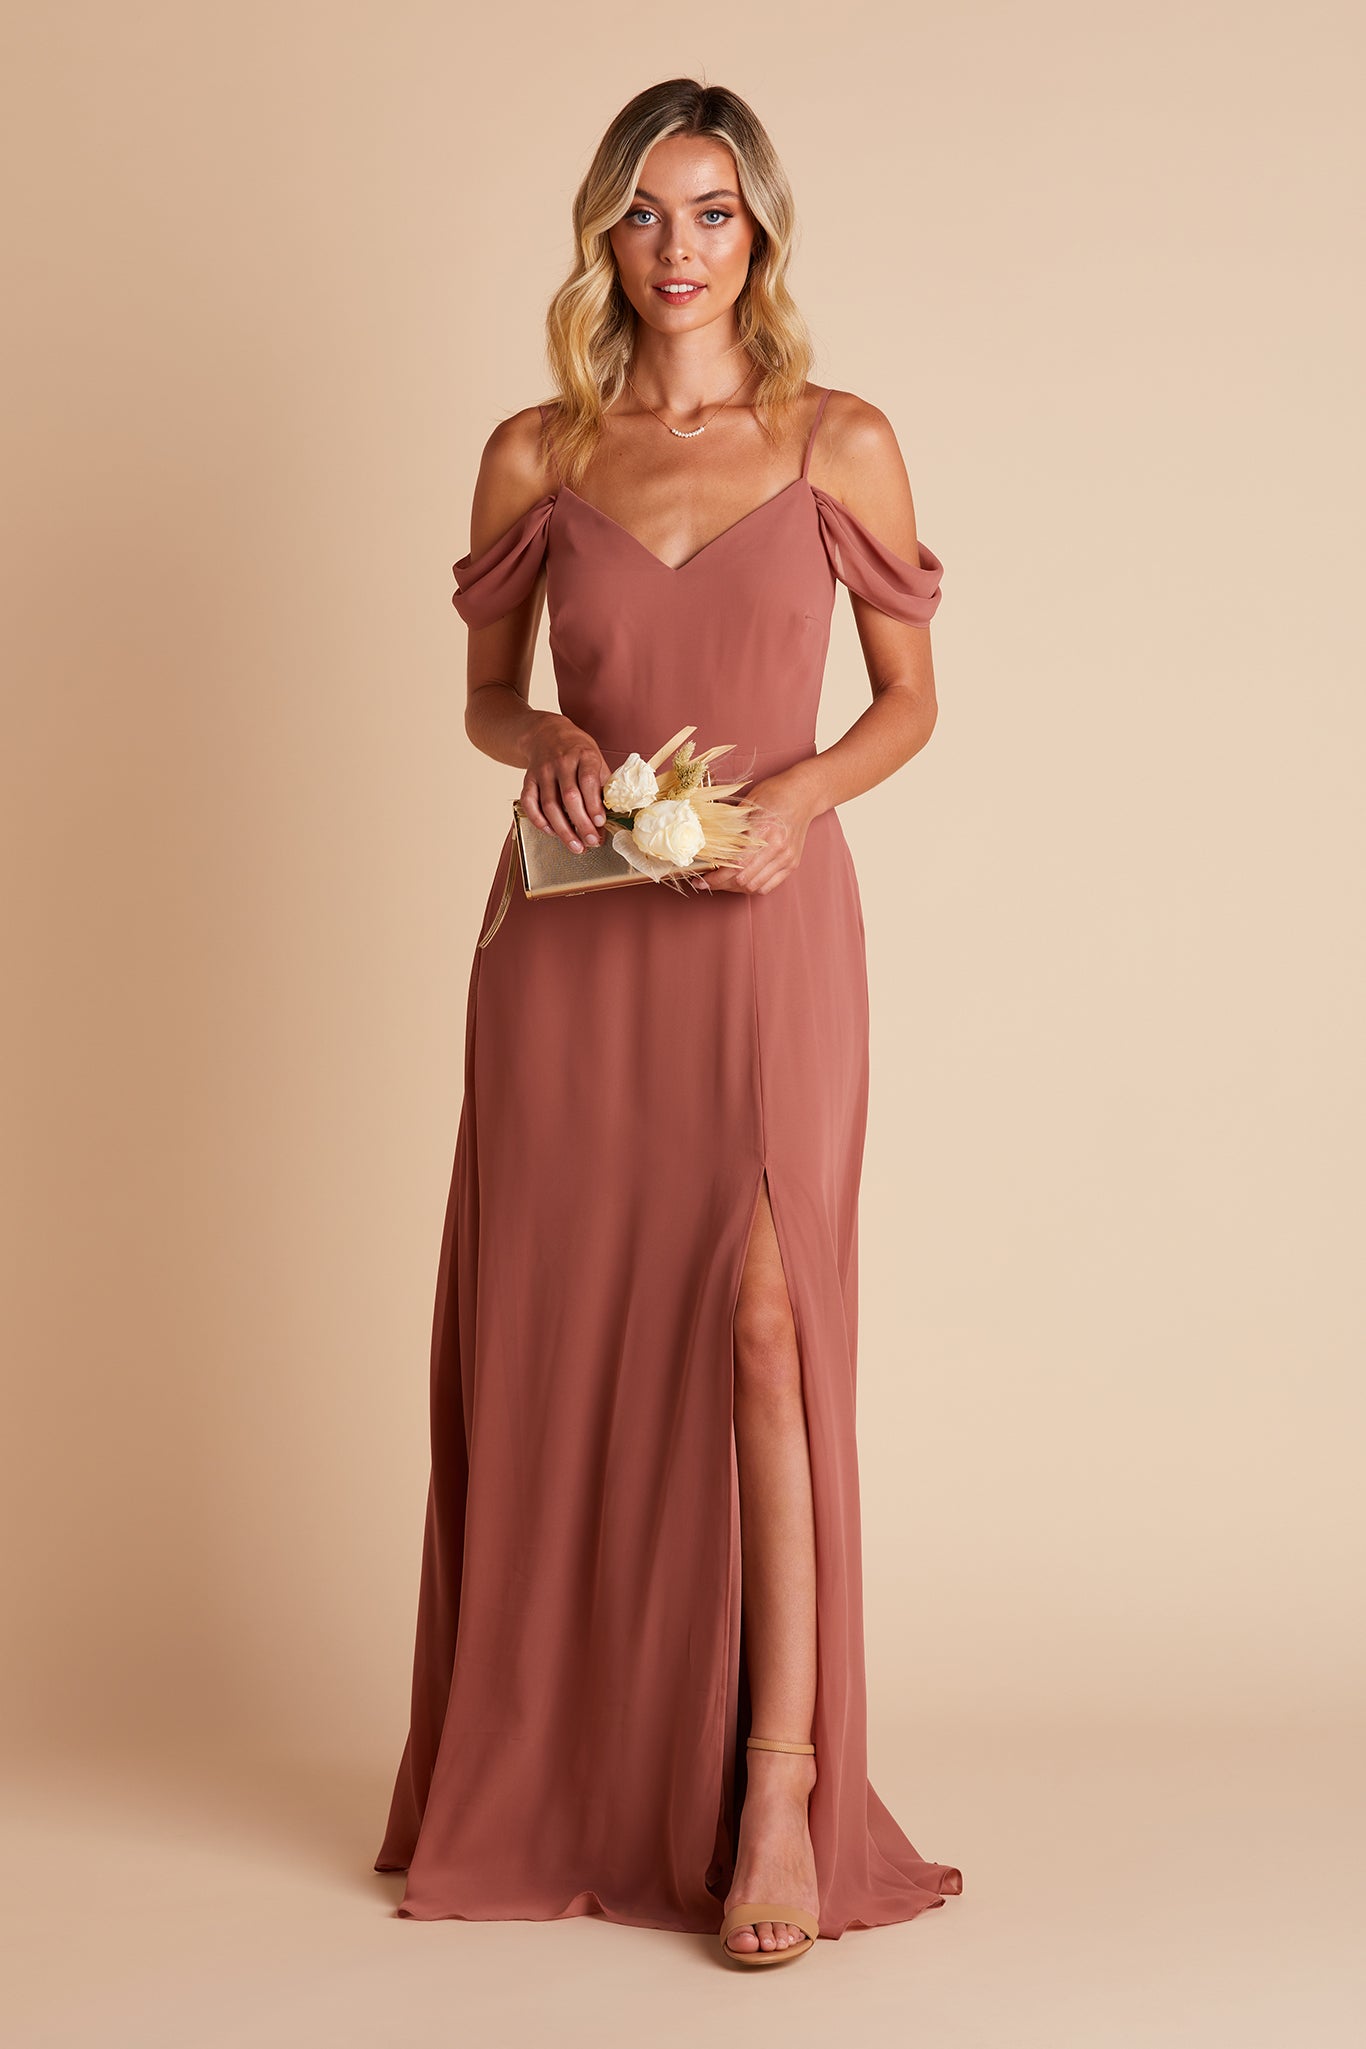 Devin convertible bridesmaid dress with slit in desert rose chiffon by Birdy Grey, front view